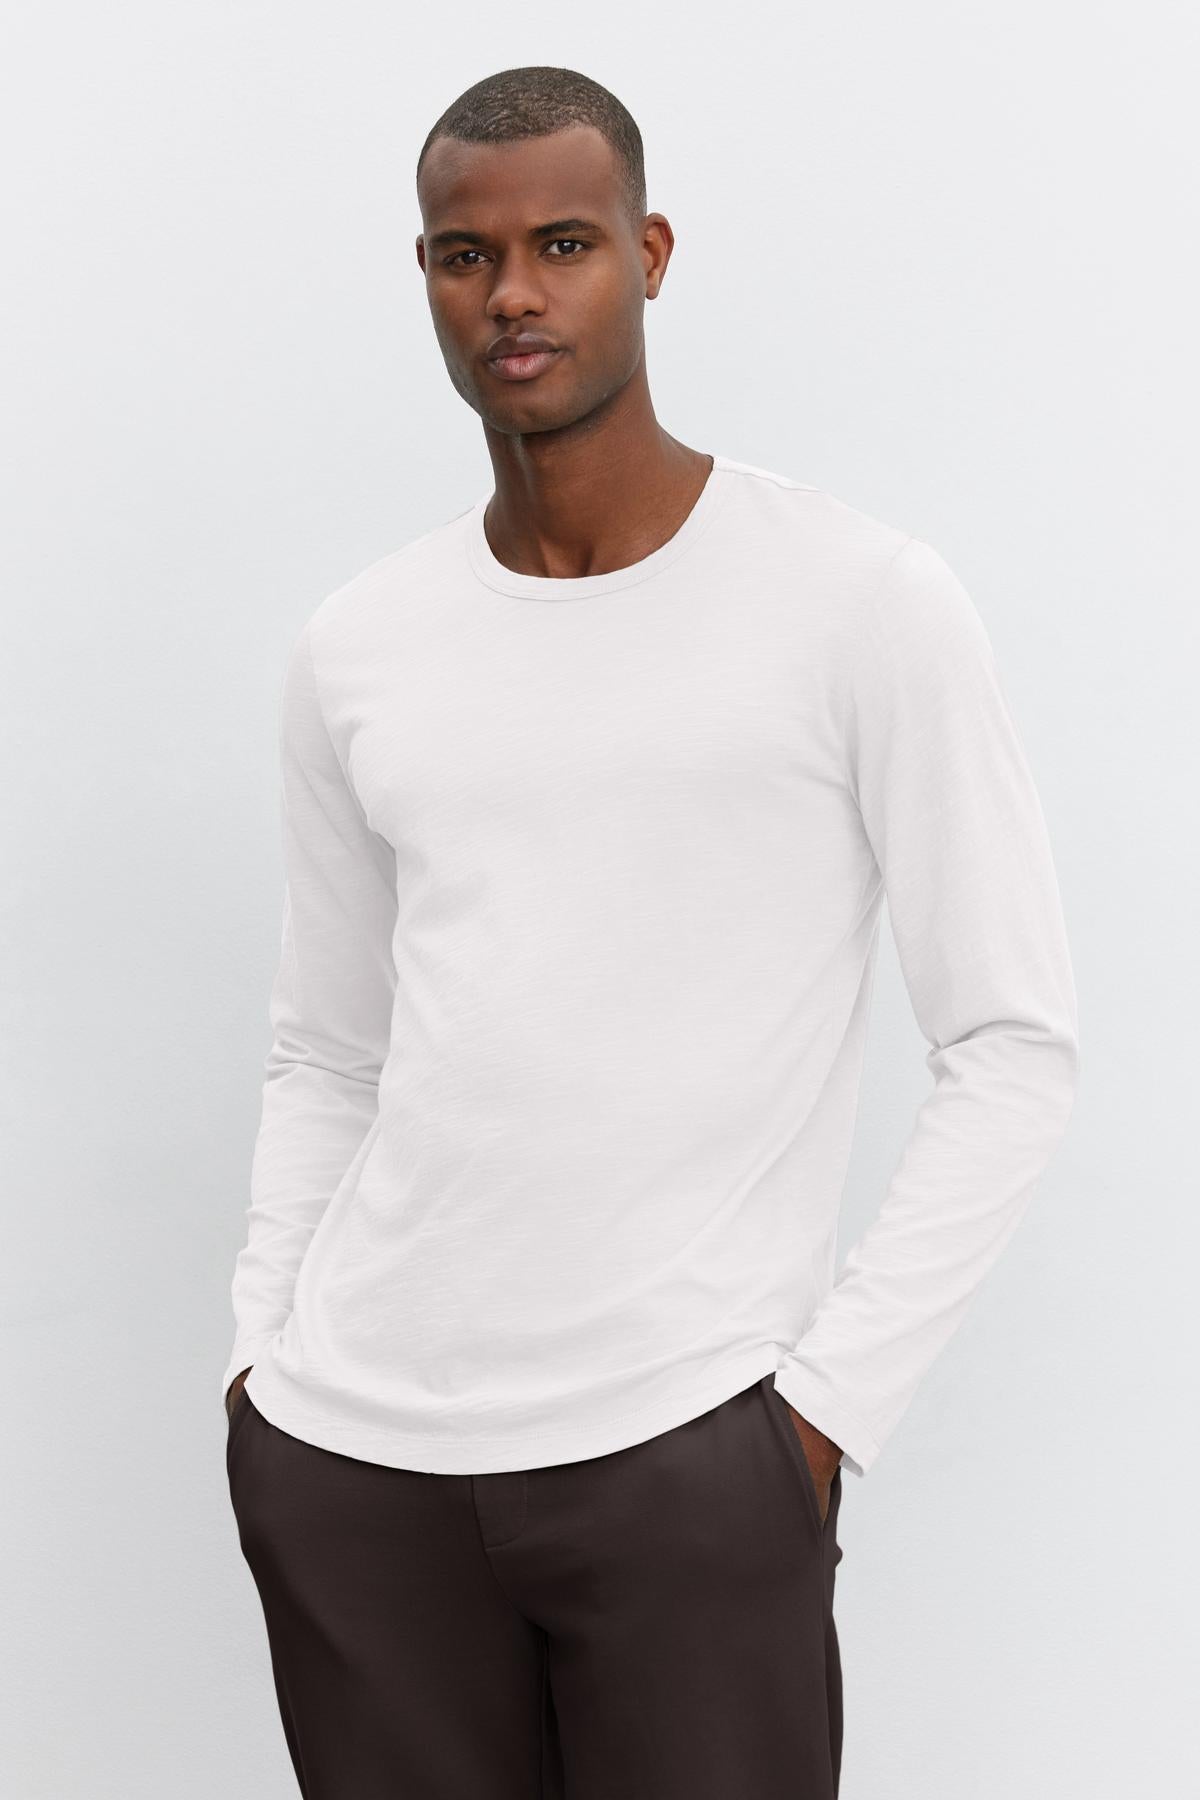   A man in a Velvet by Graham & Spencer KAI CREW NECK TEE and dark trousers stands against a light gray background, looking directly at the camera. 